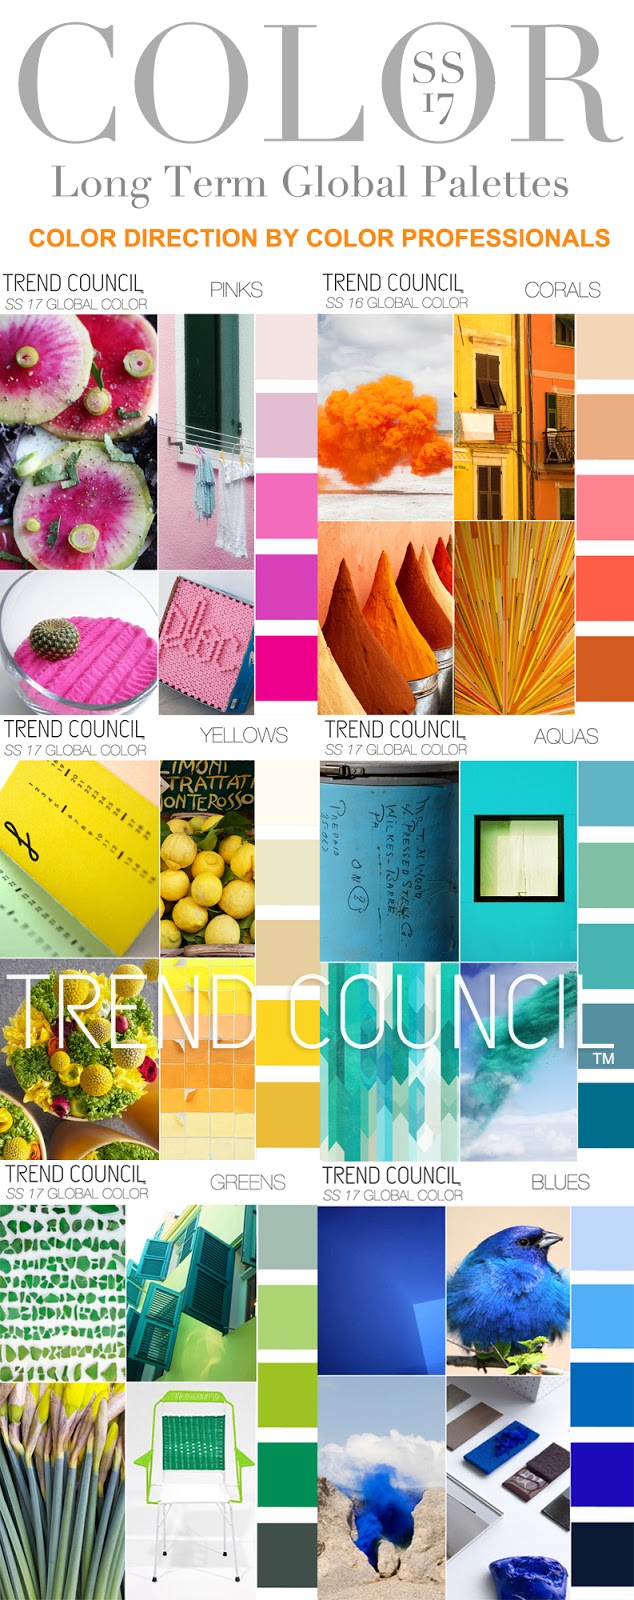 Trends Trend Council Global Color Direction Ss 2017 Coloring Wallpapers Download Free Images Wallpaper [coloring654.blogspot.com]